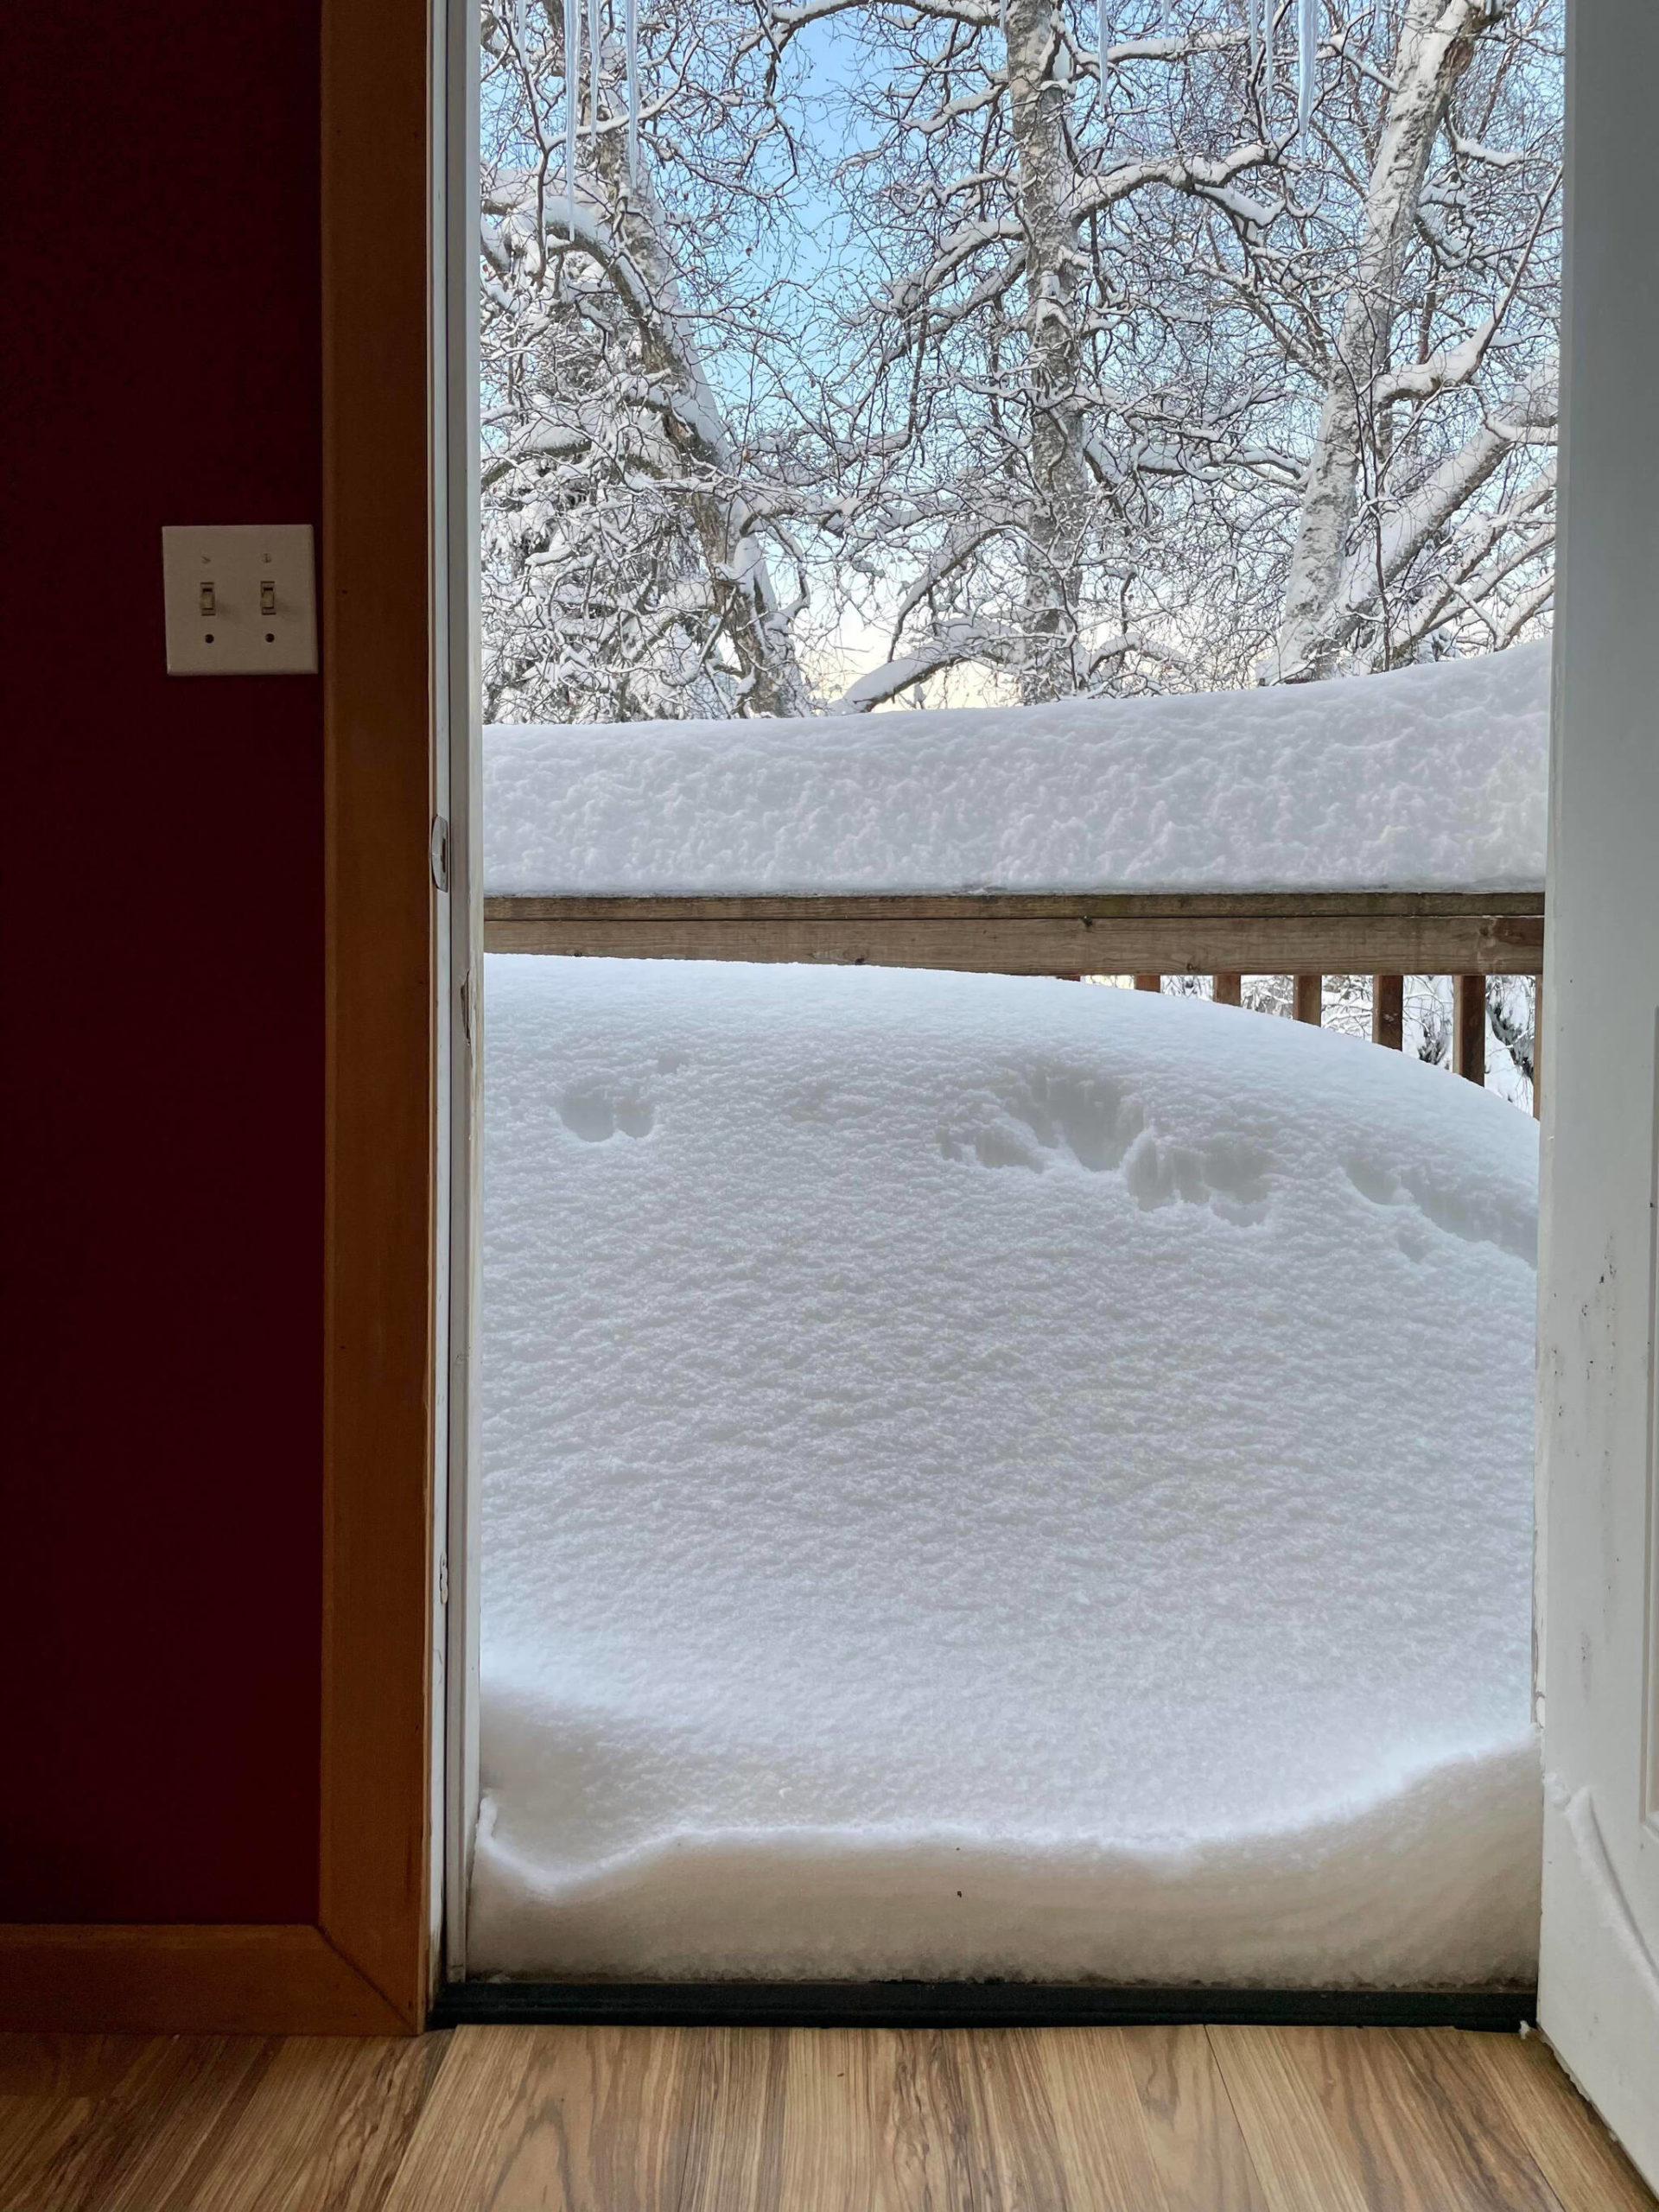 Snow blocks the doorway of a home on West Riverview Avenue area in Soldotna, Alaska, on Monday, Dec. 12, 2022. (Photo courtesy Matthew Rundle)